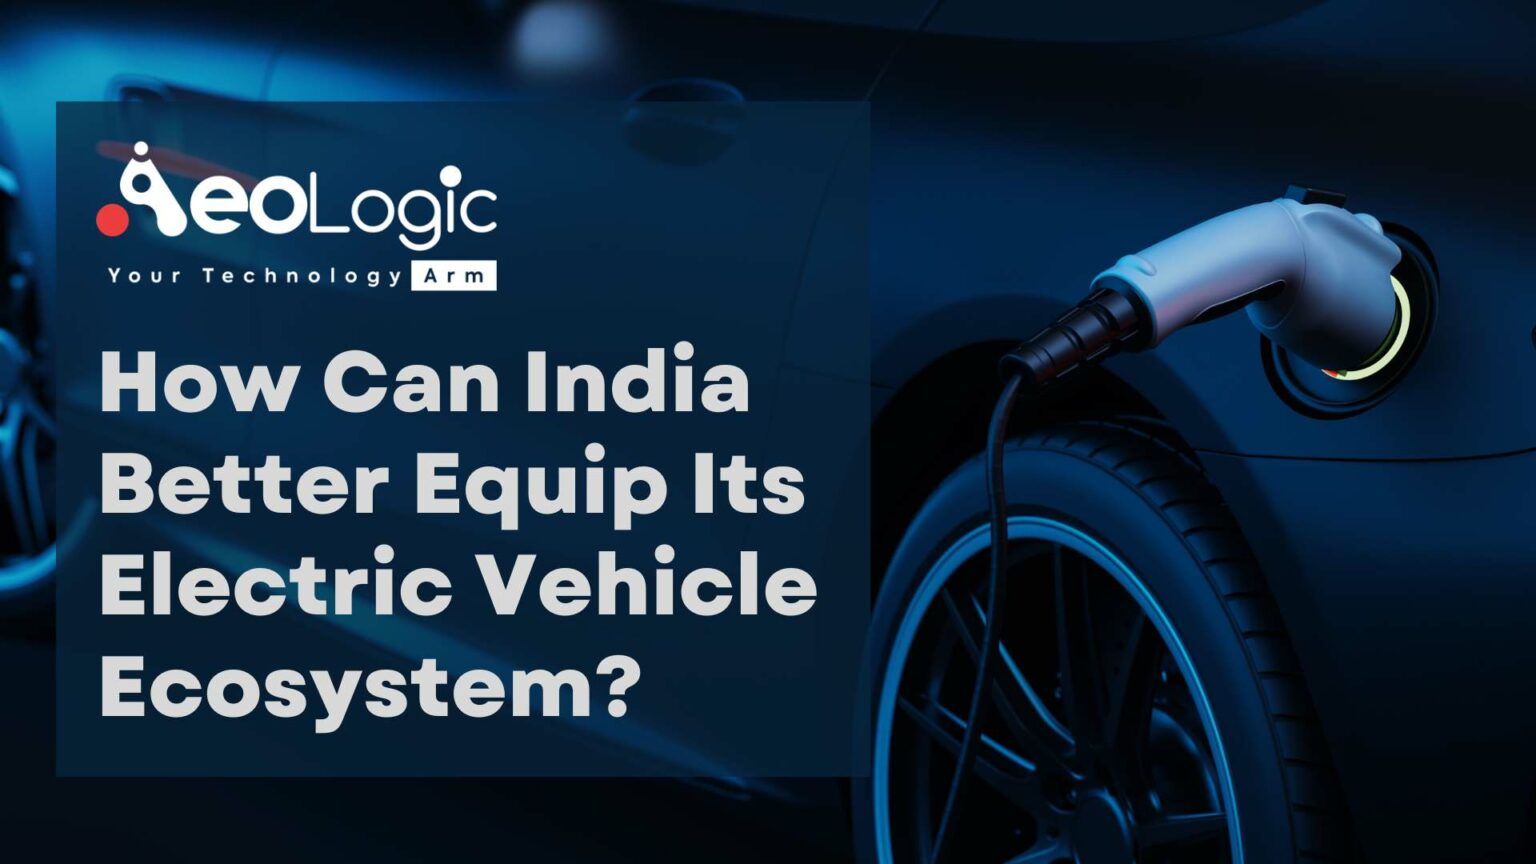 How can India Better Equip its Electric Vehicle Ecosystem?